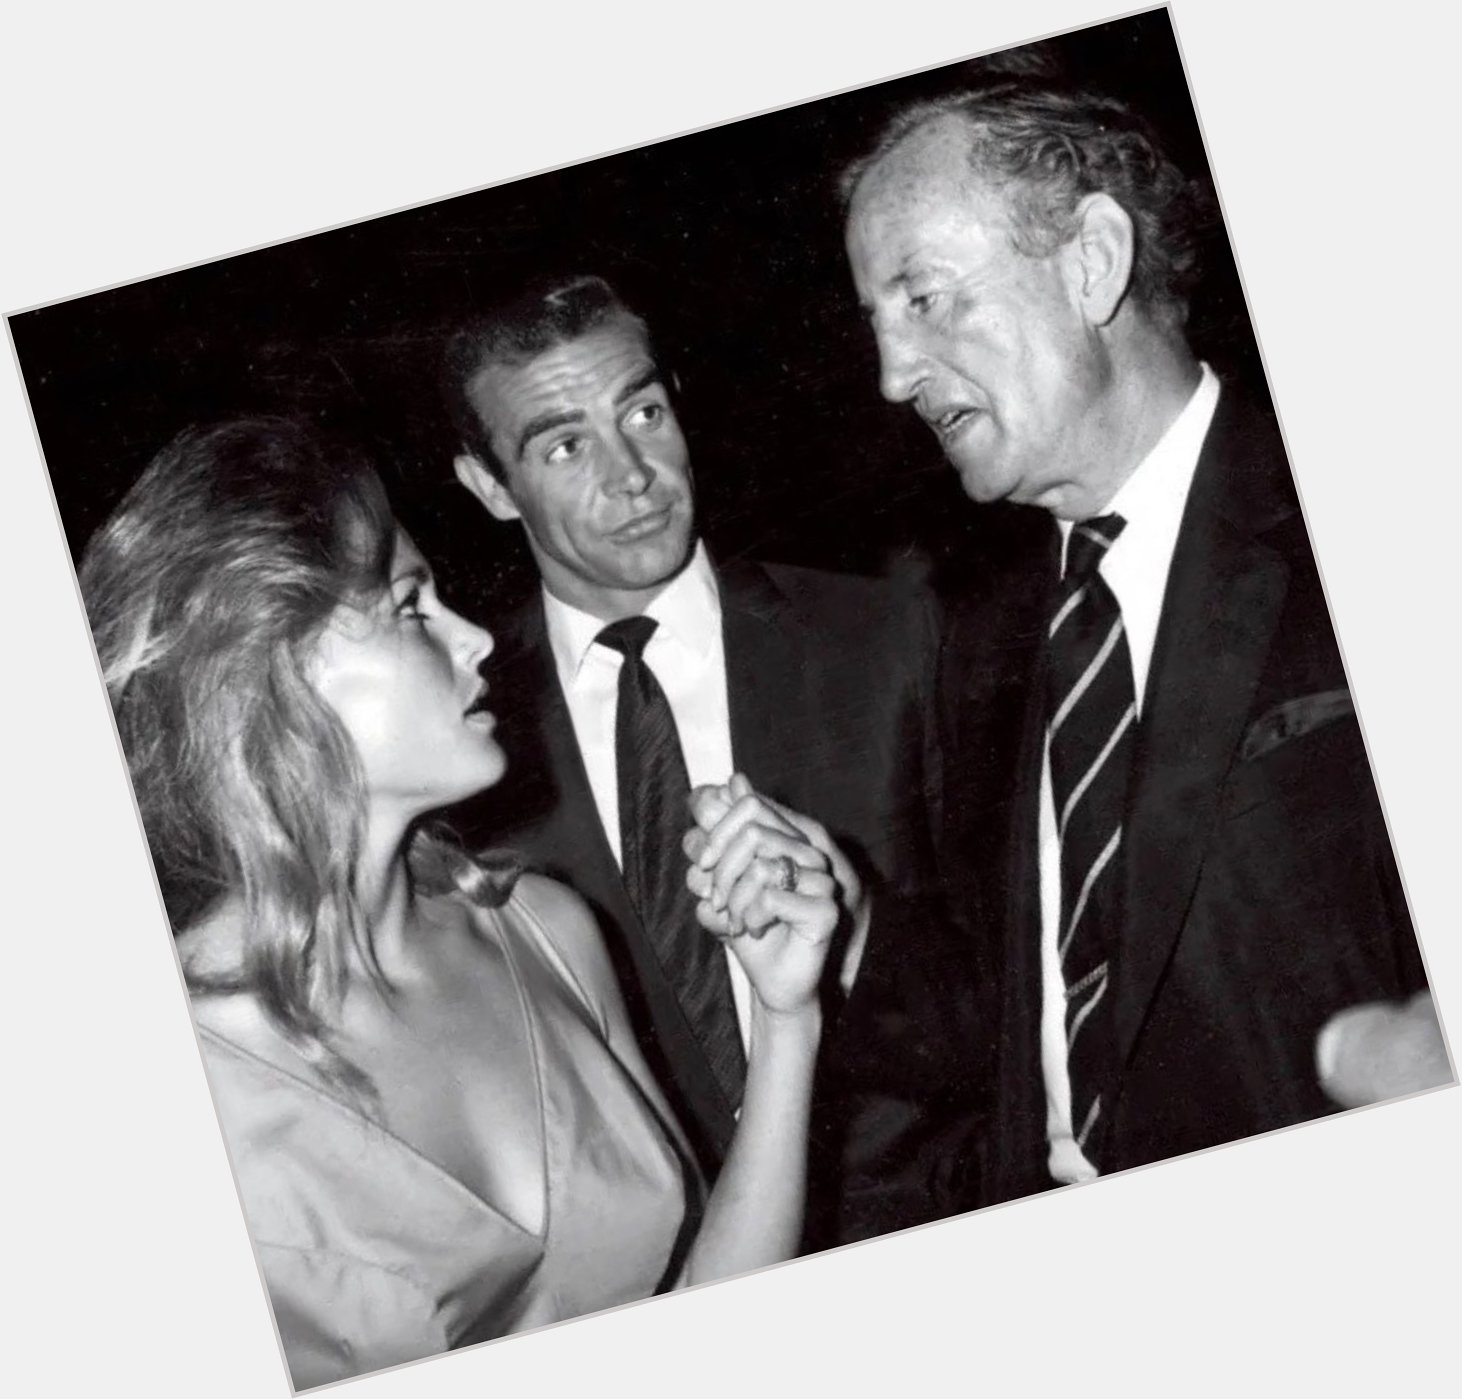 Happy Birthday to Ursula Andress pictured here with Ian Fleming and Sean Connery from 1962 s DR. NO. 